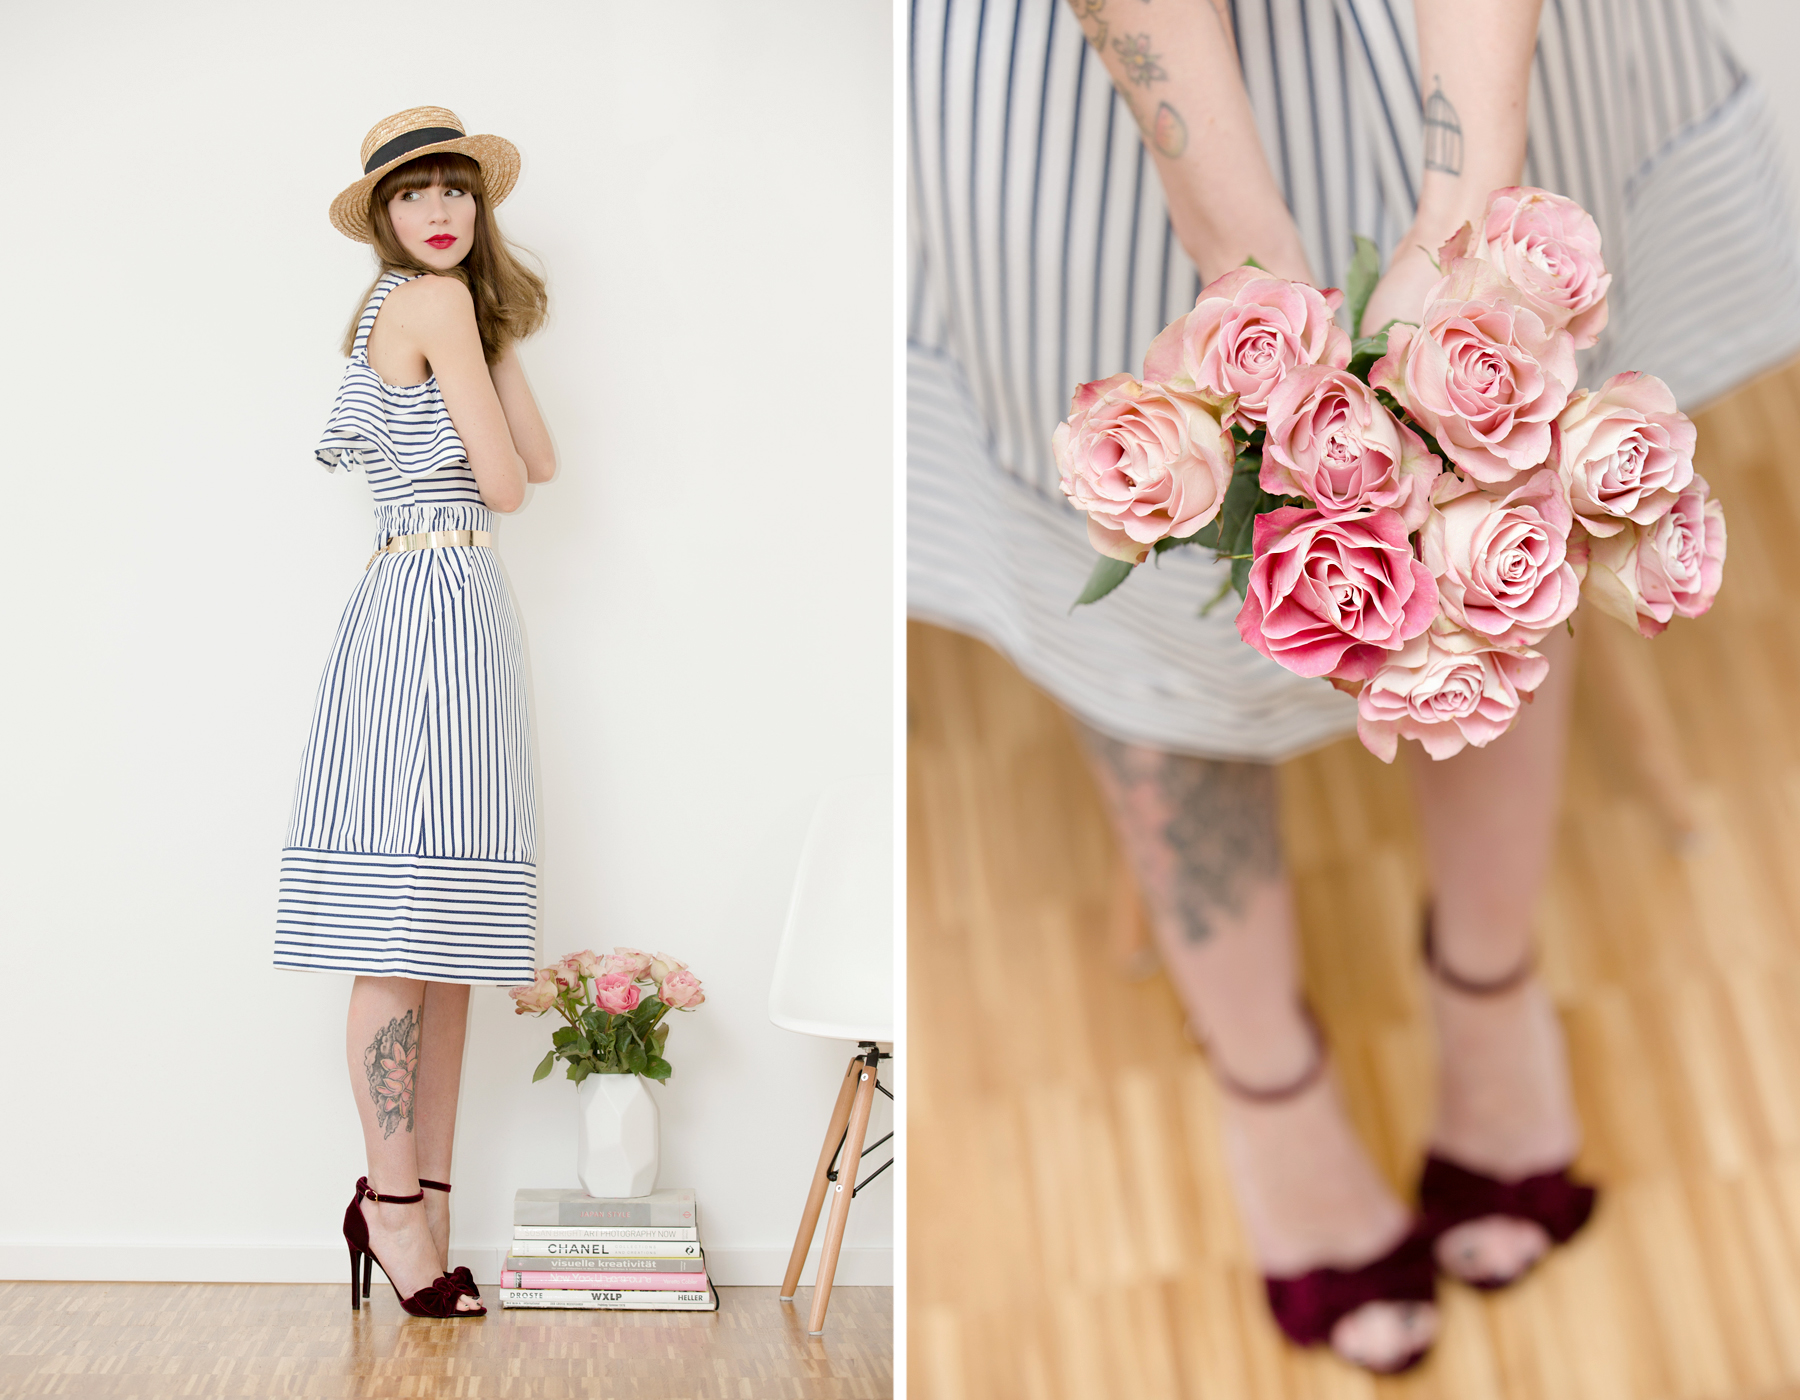 shopbop striped outfit styling topshop roses valentines day valentinstag hut 50s 60s cute girly girl bangs brunette red lips ootd outfit fashionblogger ricarda schernus cats & dogs blog 2